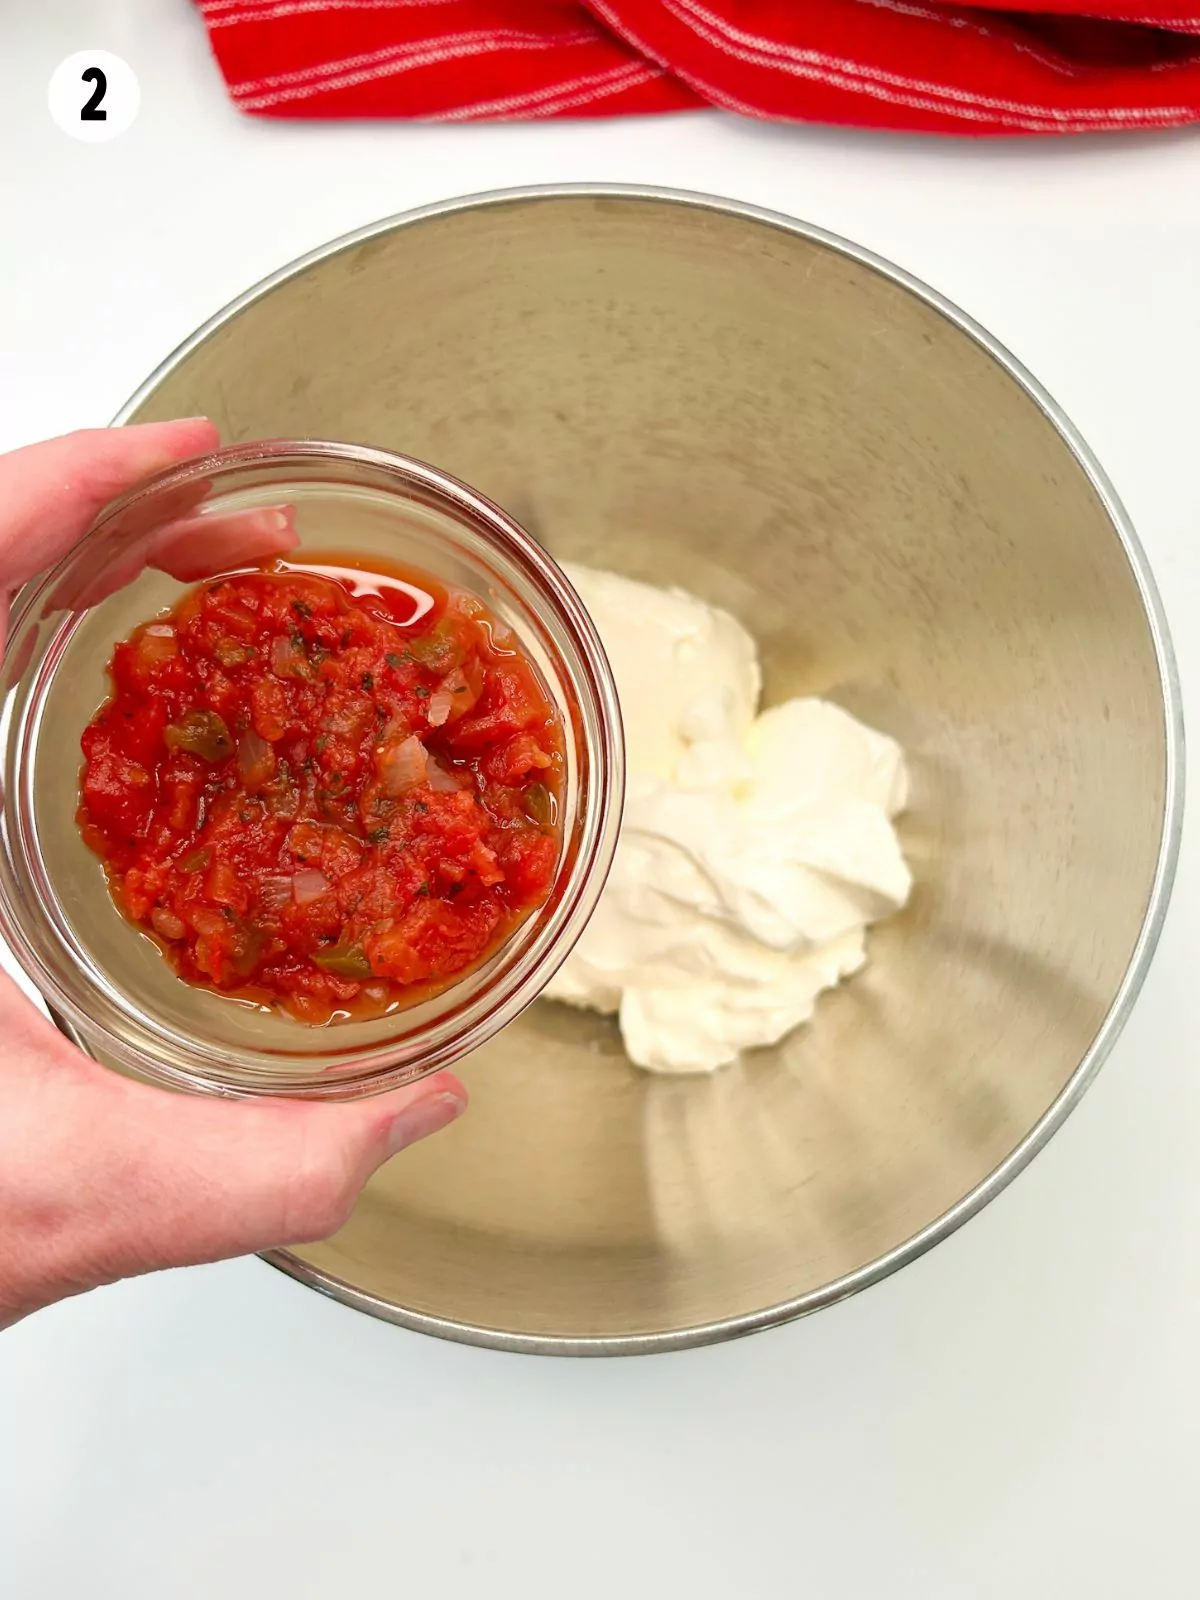 small bowl of salsa being held over mixing bowl with sour cream and cream cheese.